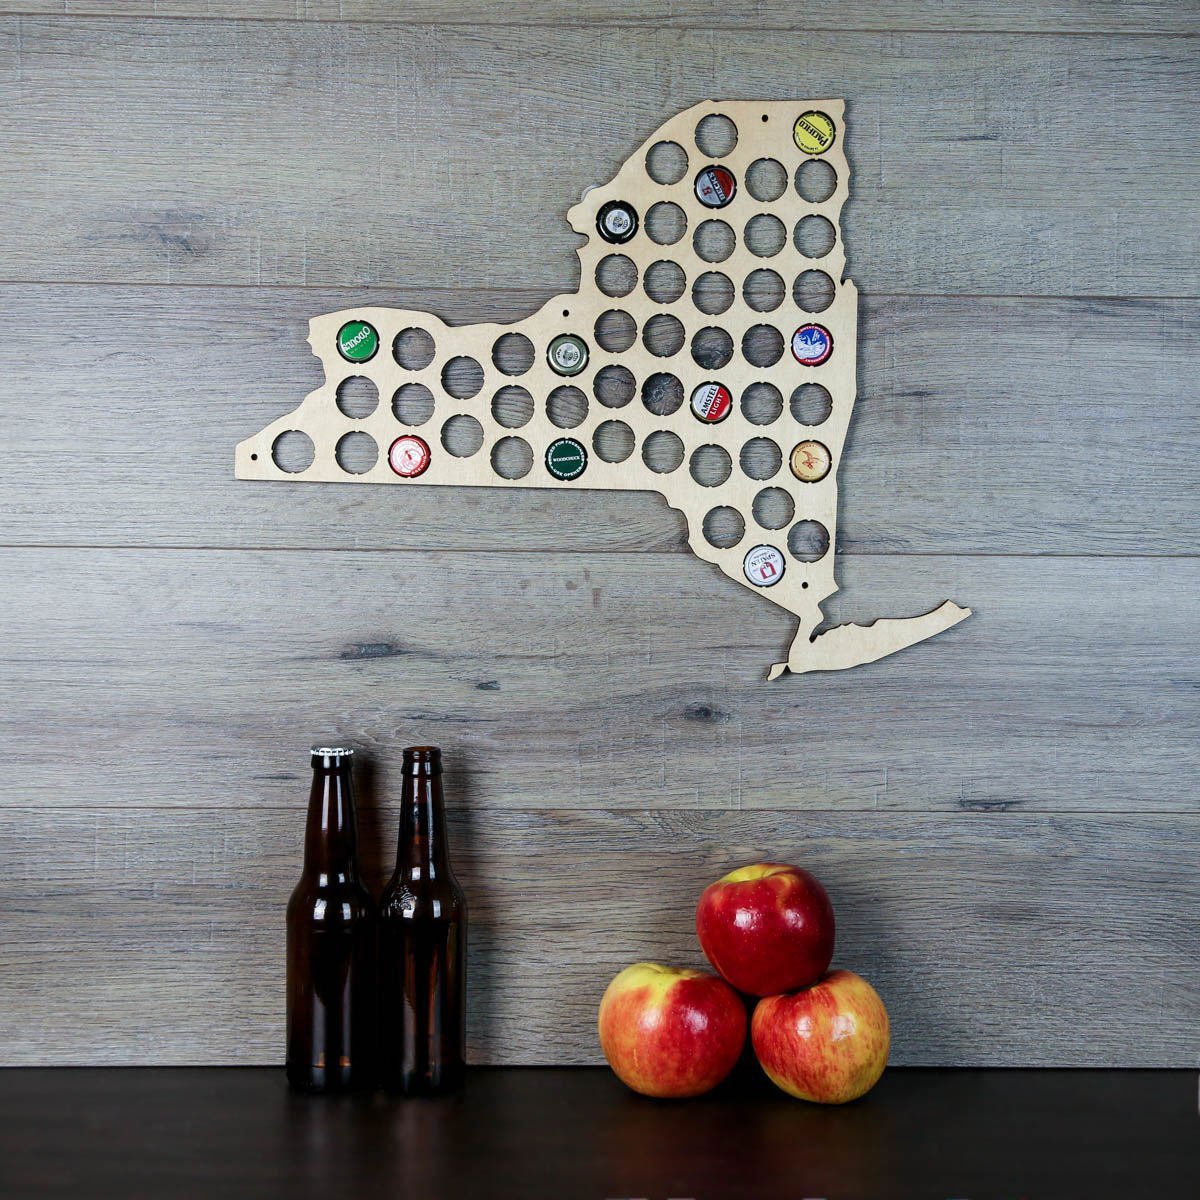 Torched Products Beer Bottle Cap Holder New York Beer Cap Map (777575497845)